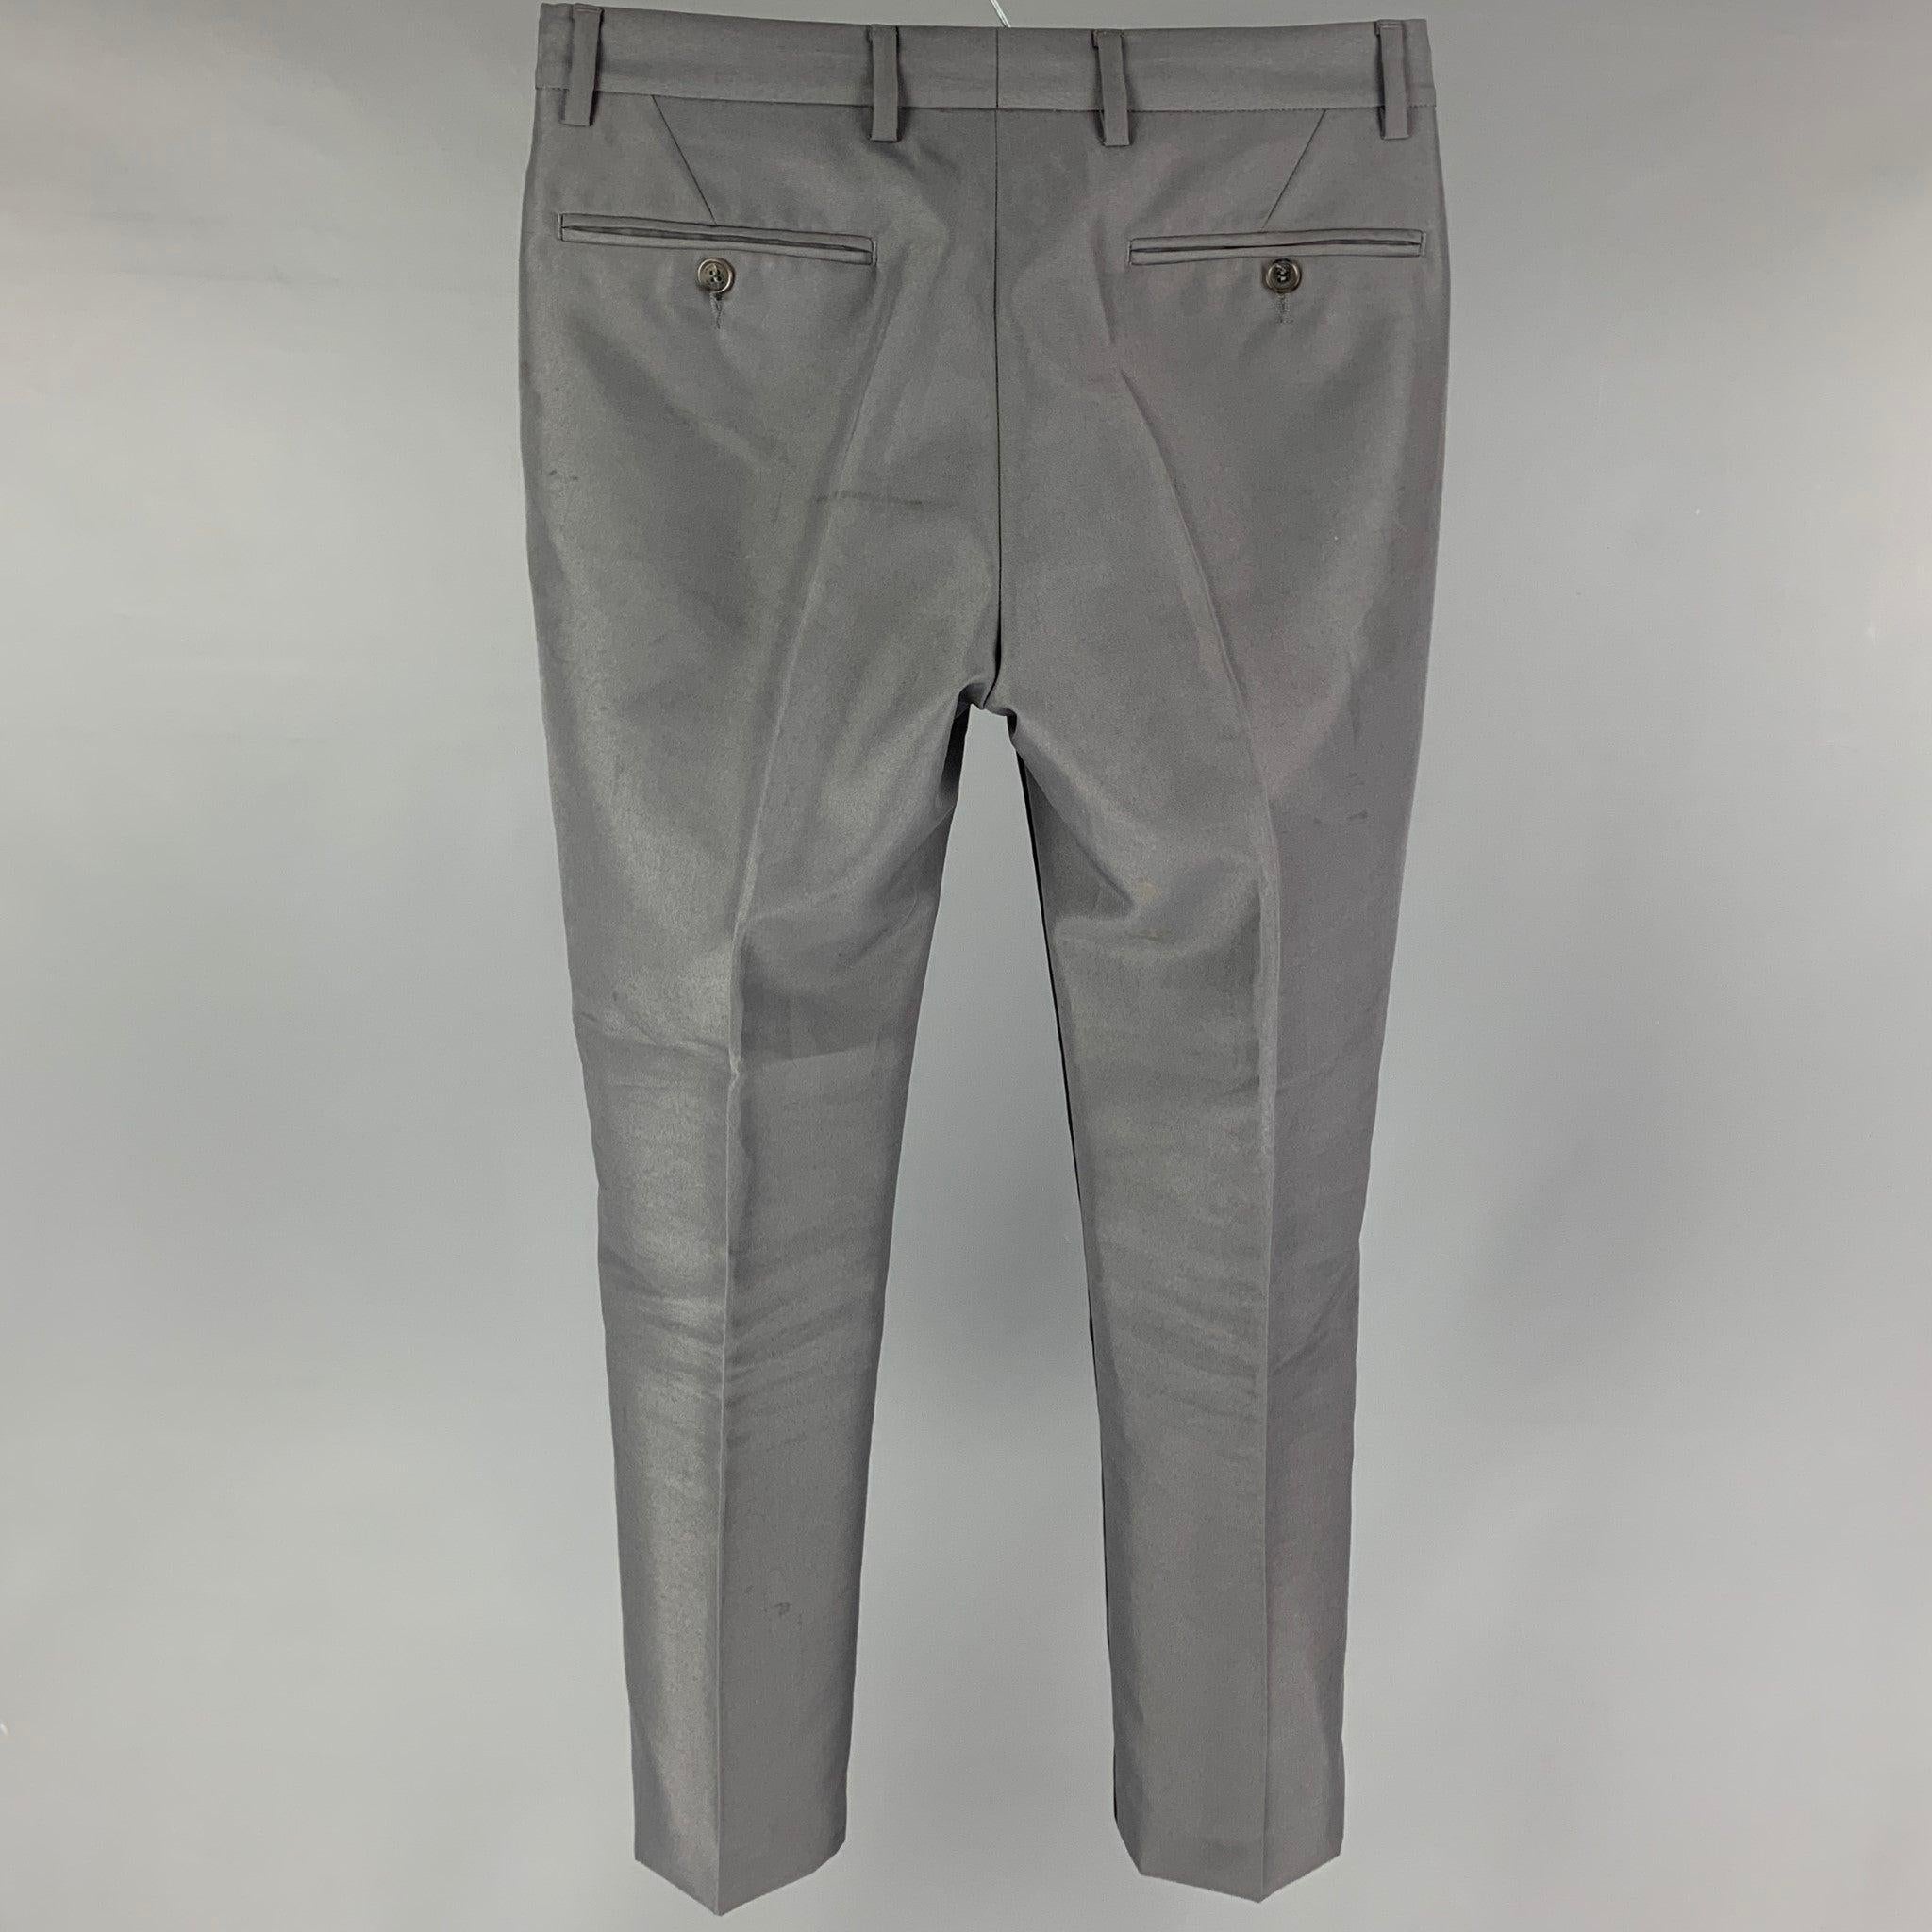 CALVIN KLEIN COLLECTION dress pants comes in a grey & navy dyed print polyamide featuring a slim fit, flat front, and a zip fly closure. Made in Italy.
Good
Pre-Owned Condition. Minor discoloration at front.  

Marked:   44/28 

Measurements: 
 